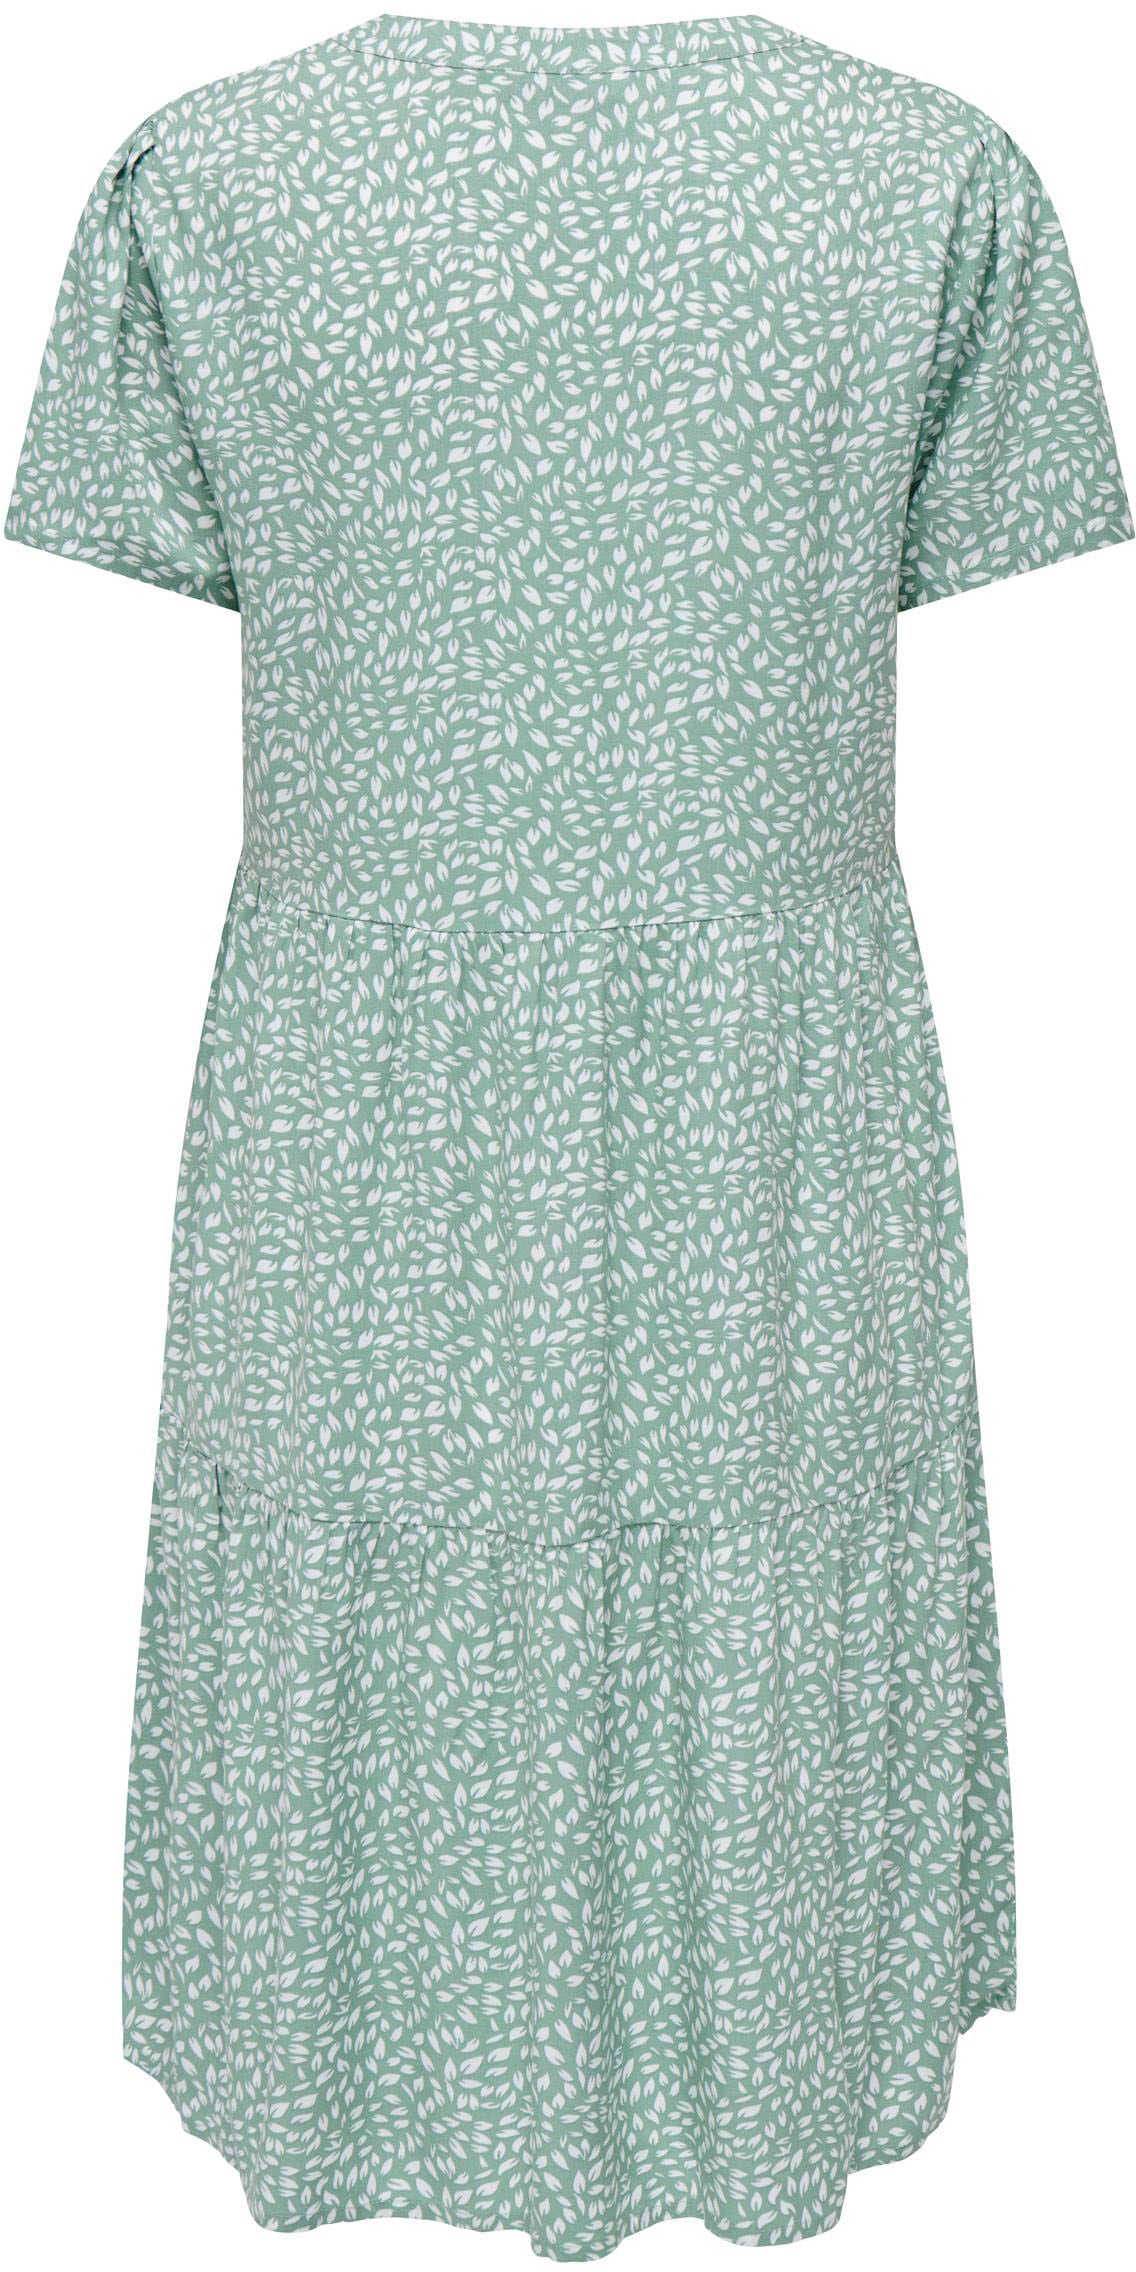 ONLY ♕ LIFE DRESS Sommerkleid PTM« NOOS S/S bei »ONLZALLY THEA